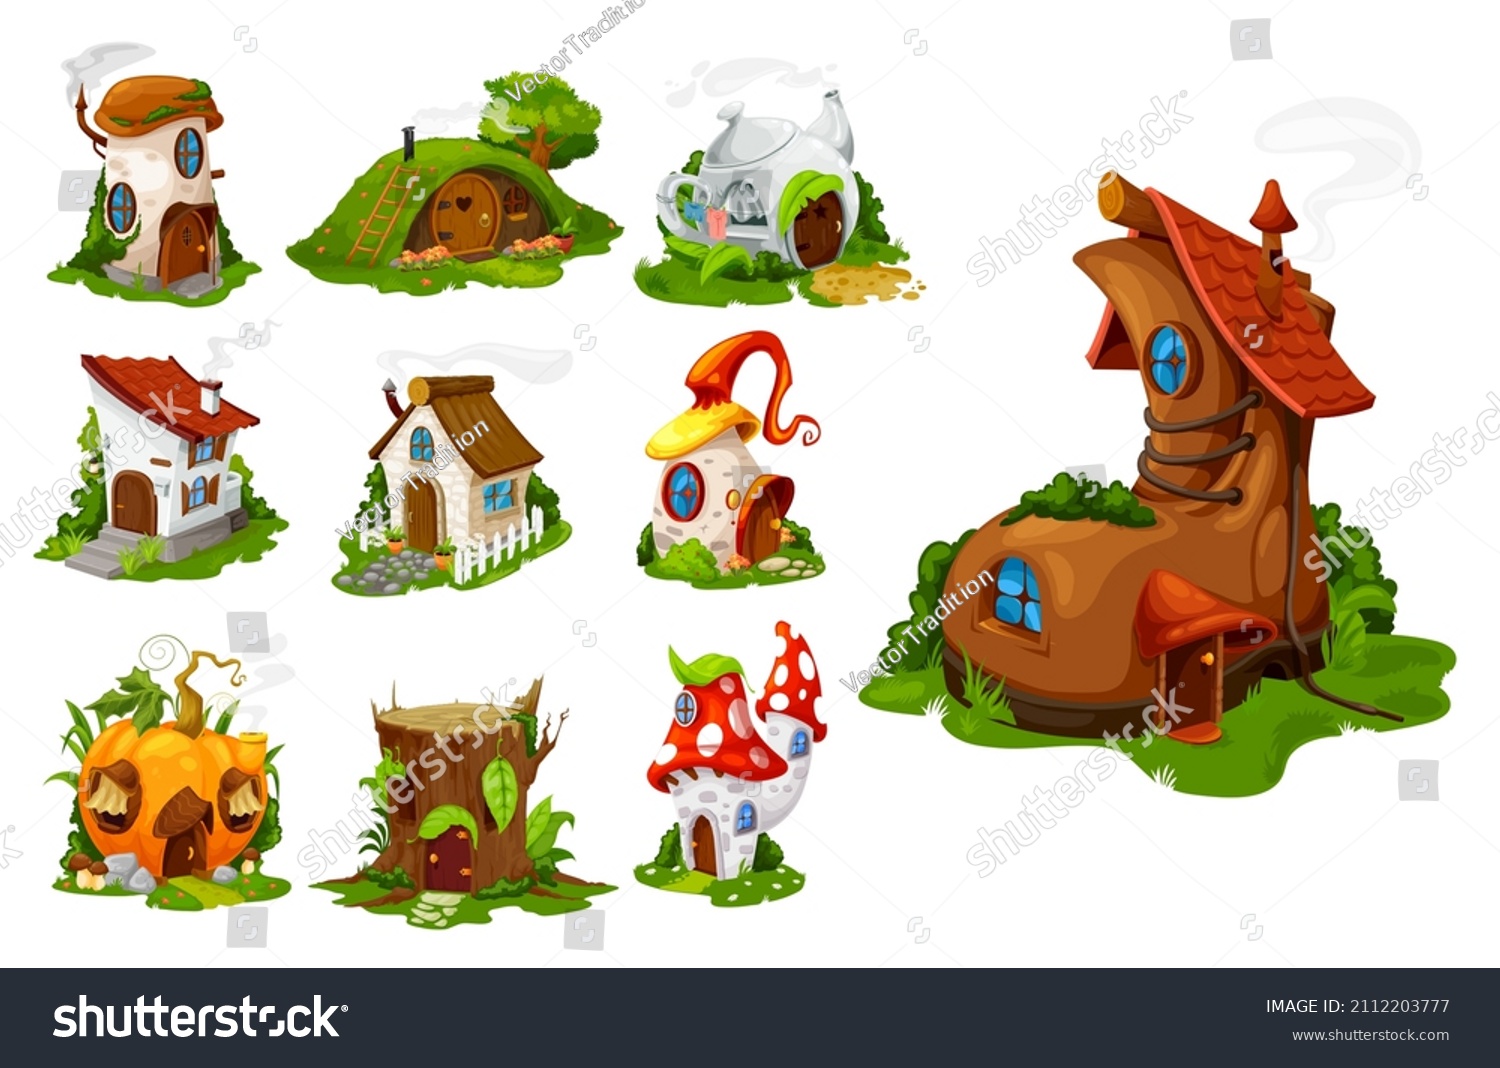 SVG of Cartoon fairytale houses and dwelling, fantasy isolated vector buildings. Pumpkin, tree stump, old boot and cozy cottage. Fairy, gnome or elf cute homes in fly agaric mushroom, hillock and teapot set svg